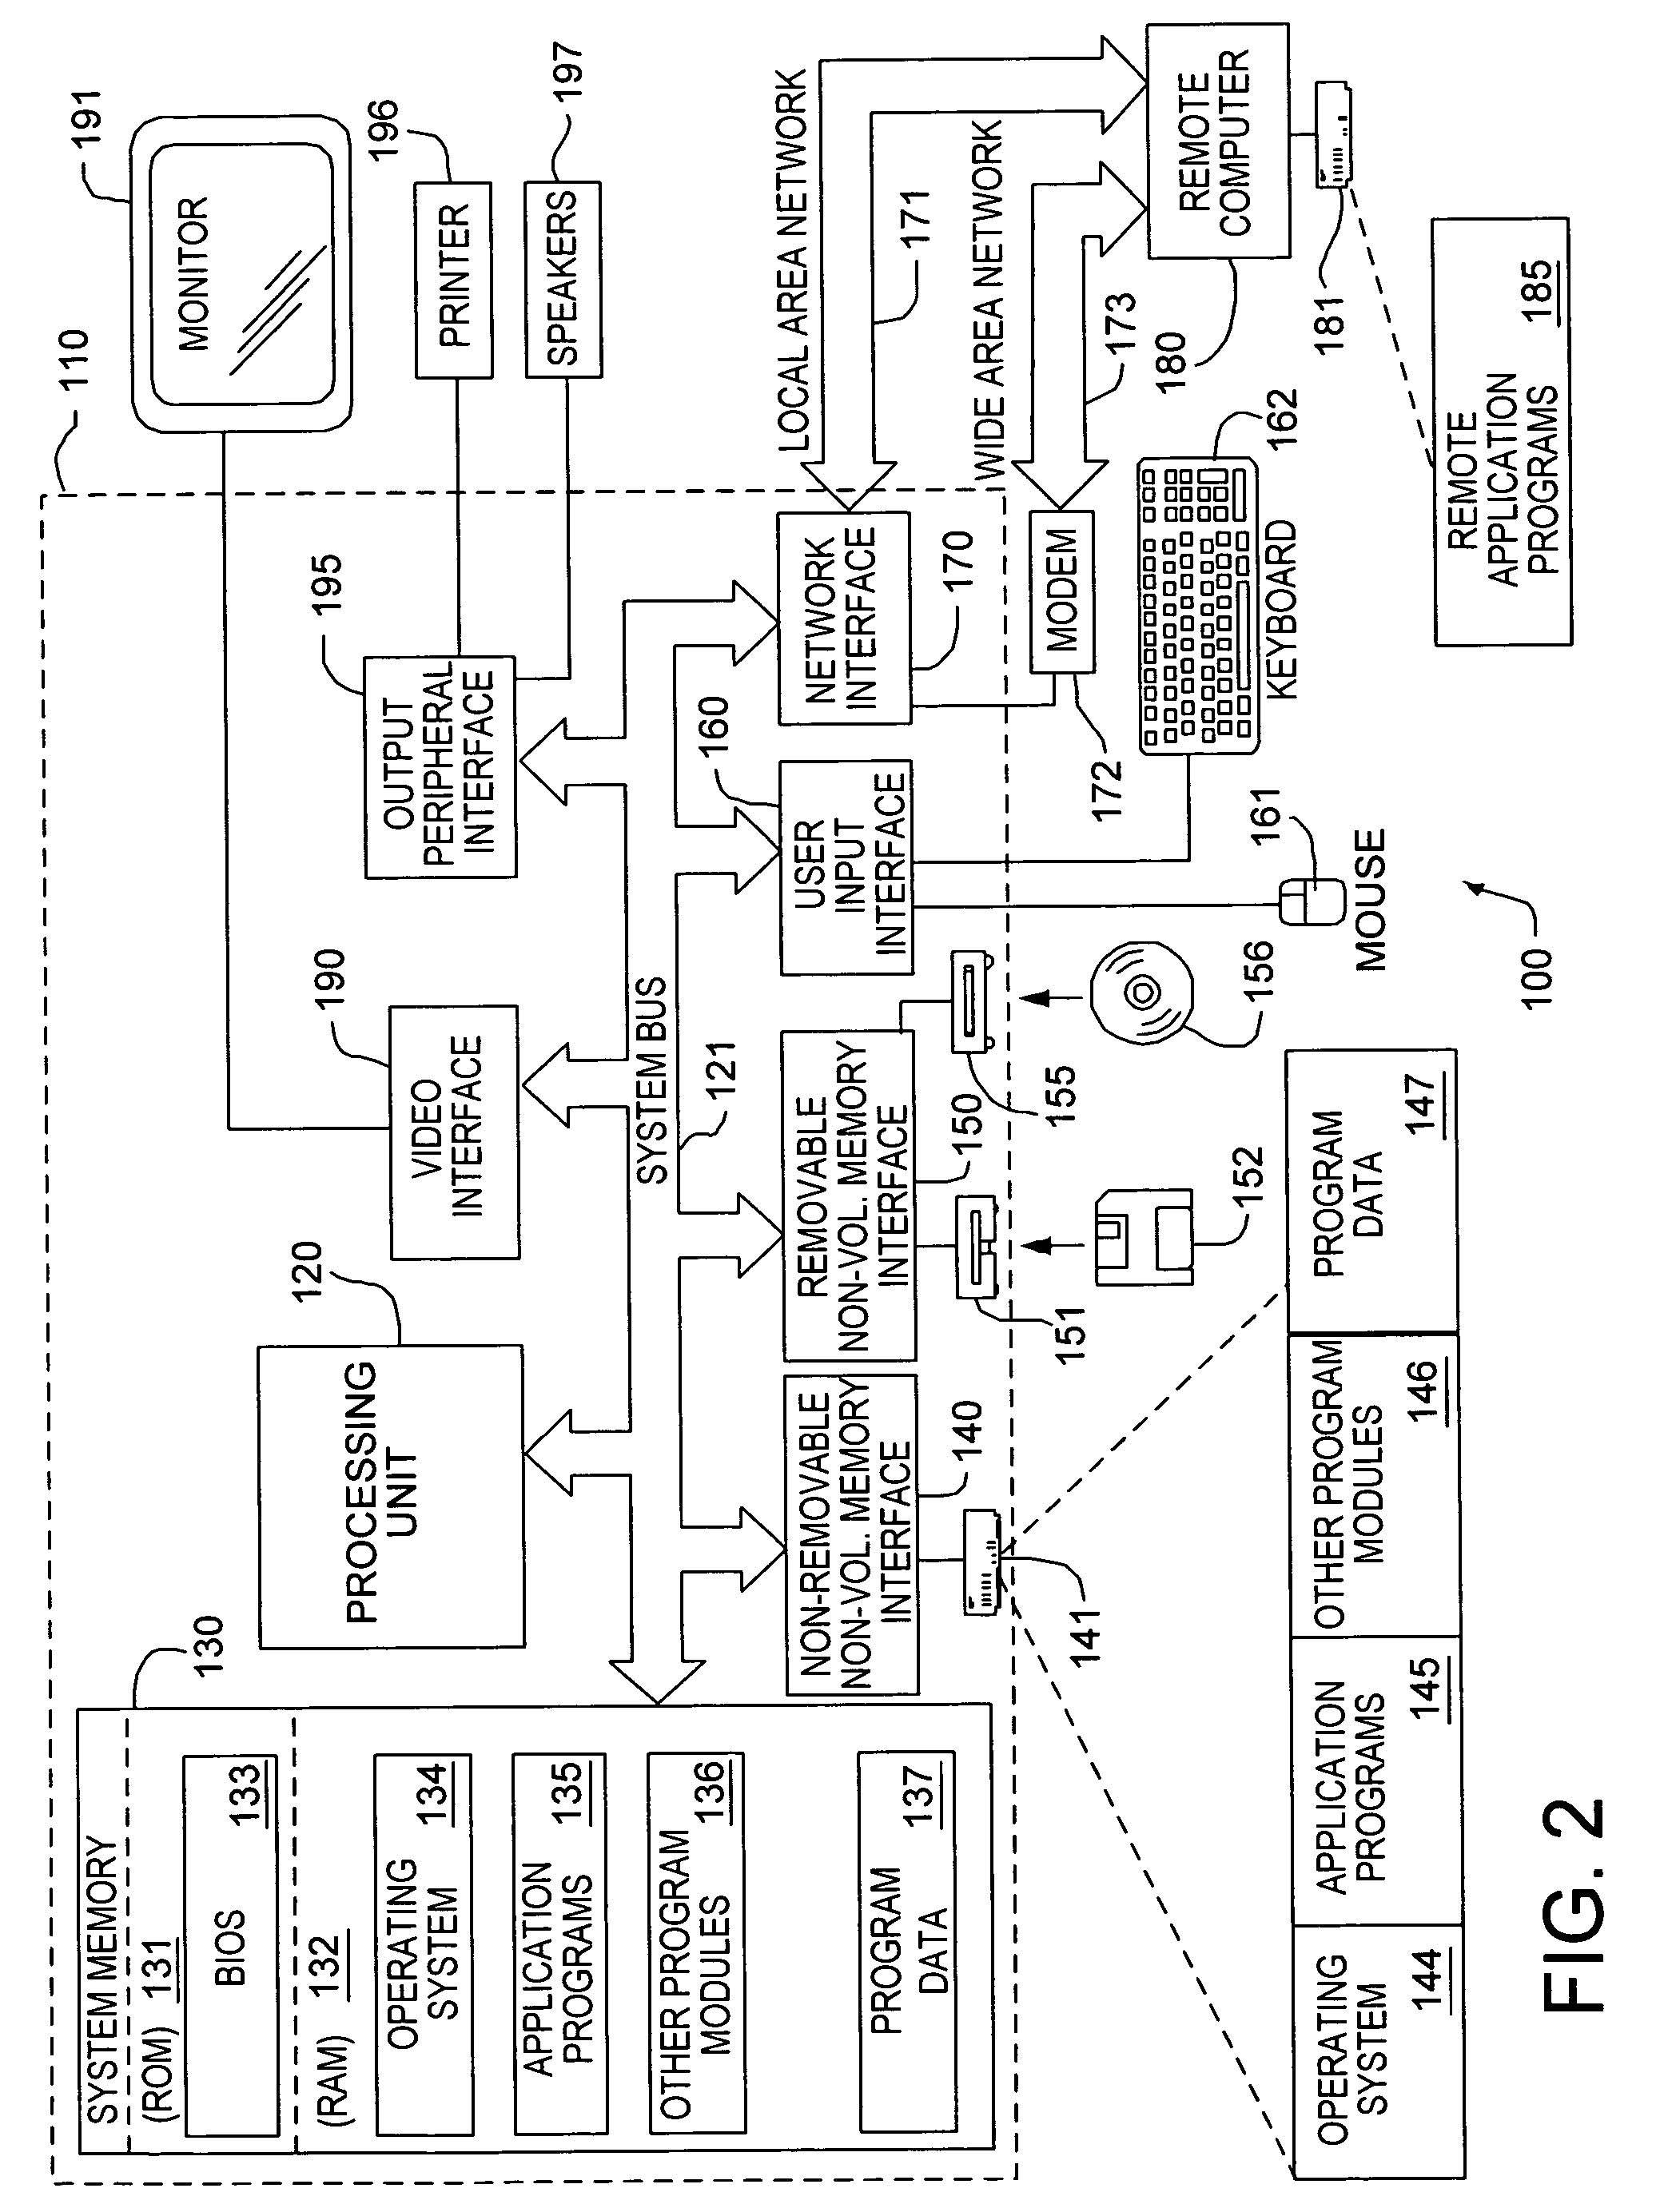 System and method for providing a geographic search function